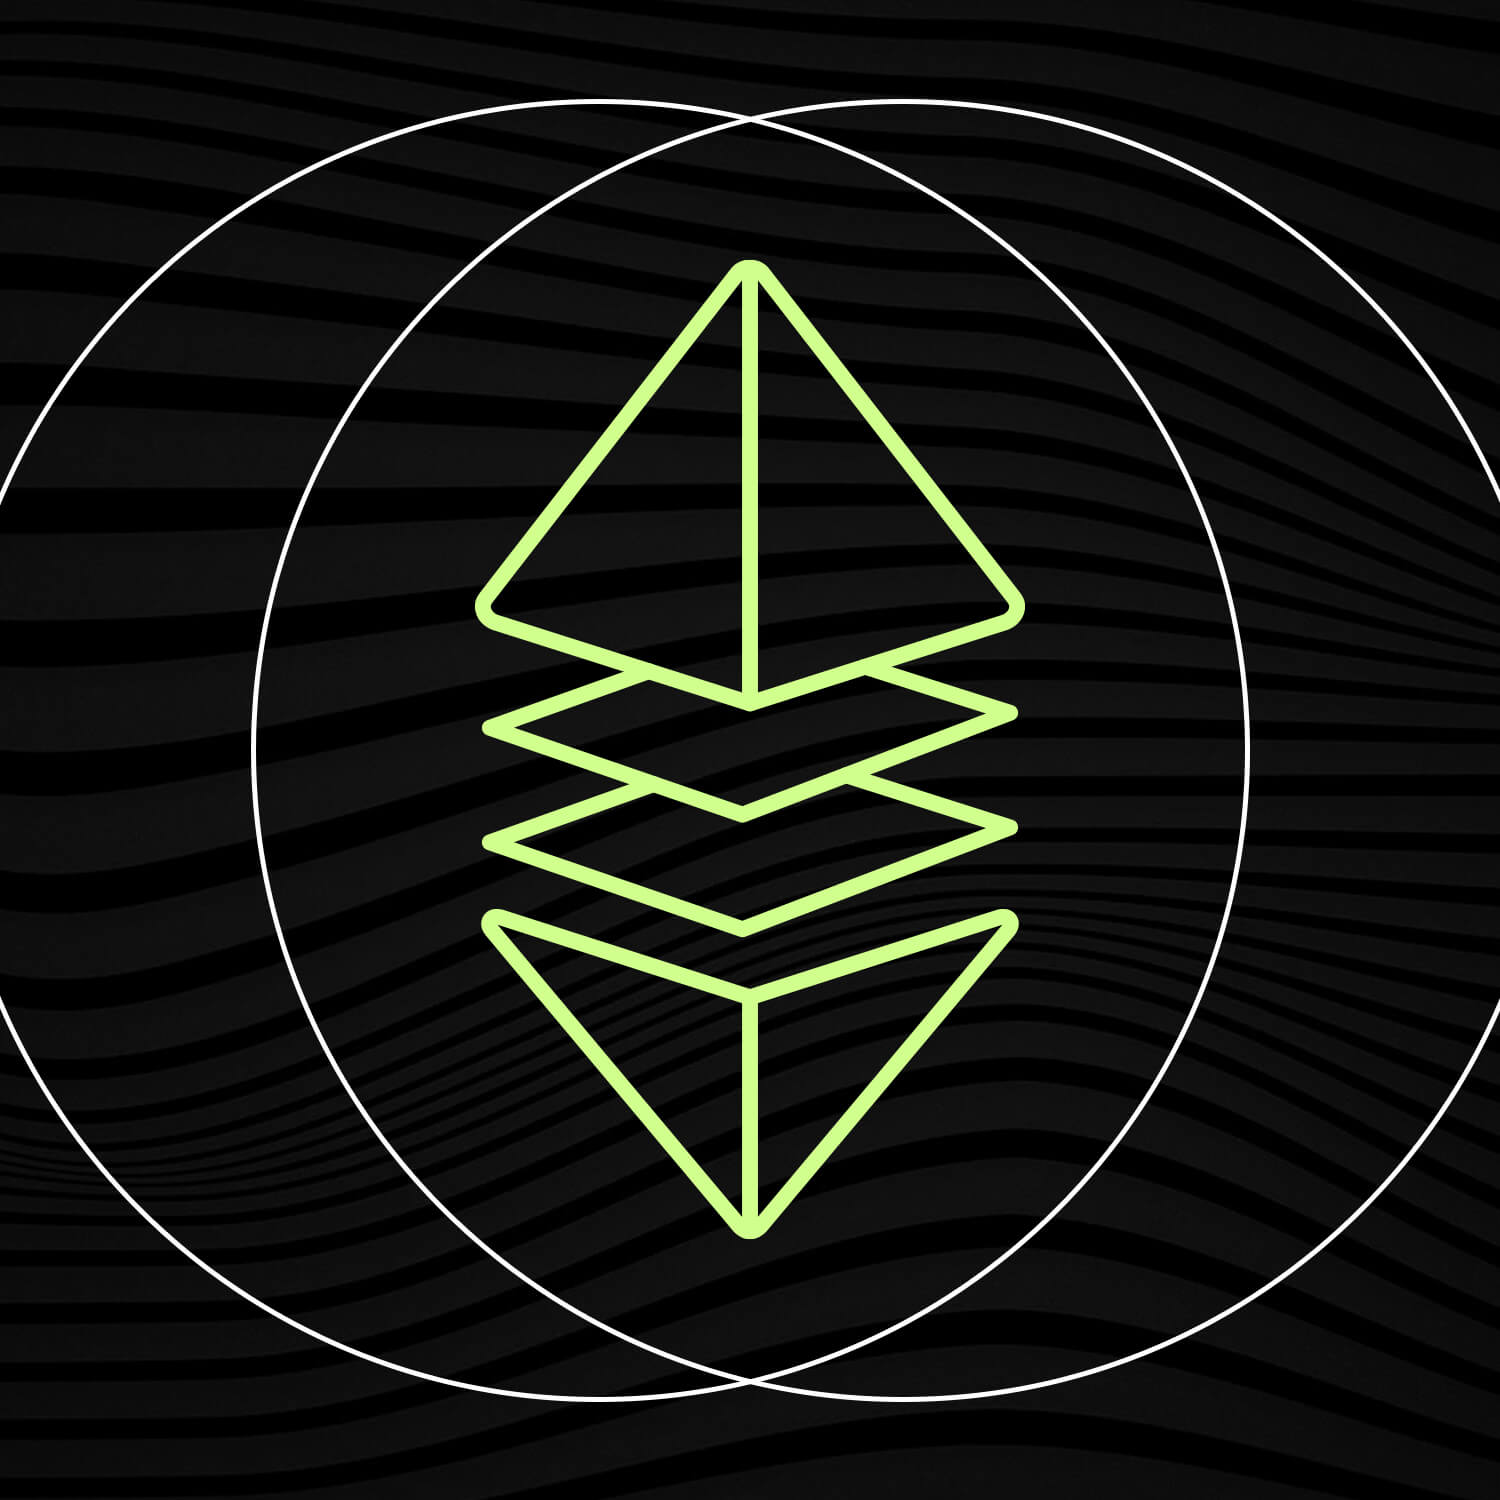 01Node Receives The Ssv Grant To Integrate Eth Staking Pool